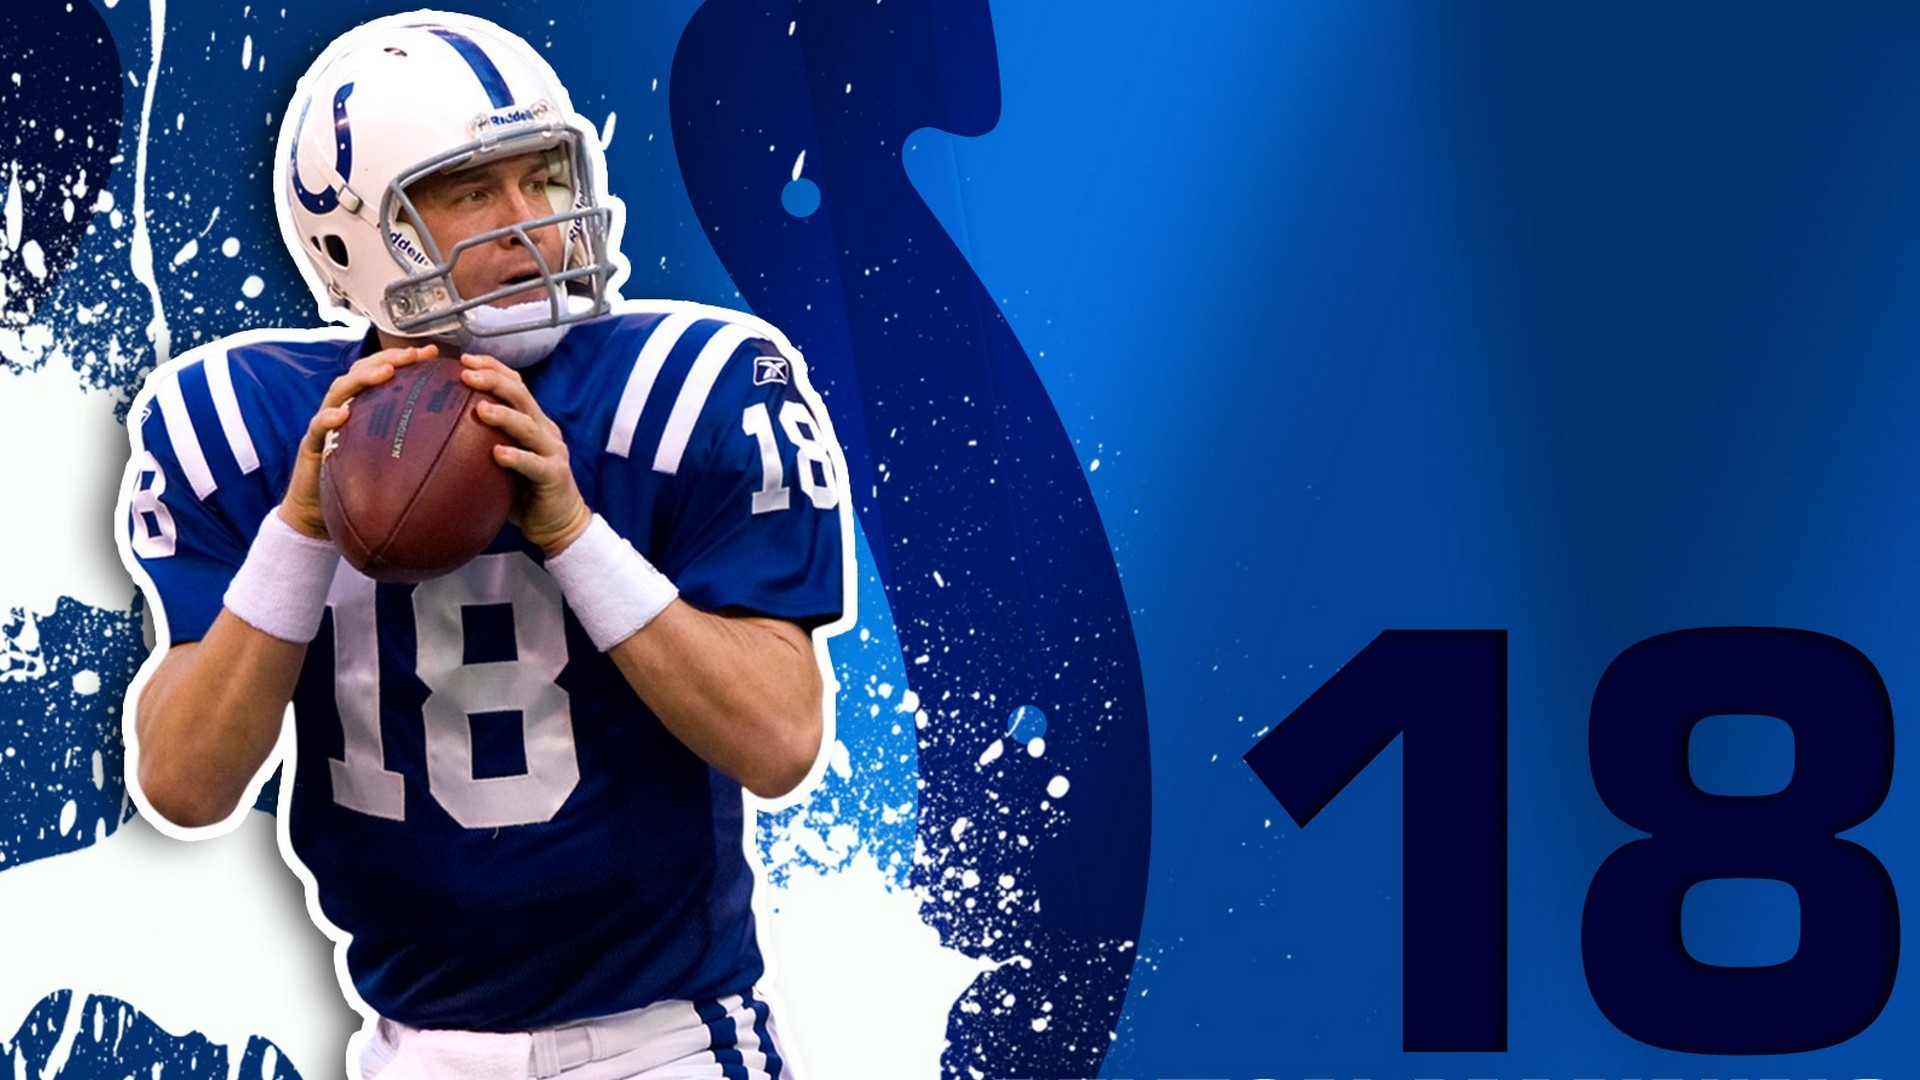 Peyton Manning Indianapolis Colts Wallpaper with high-resolution 1920x1080 pixel. You can use this wallpaper for your Mac or Windows Desktop Background, iPhone, Android or Tablet and another Smartphone device